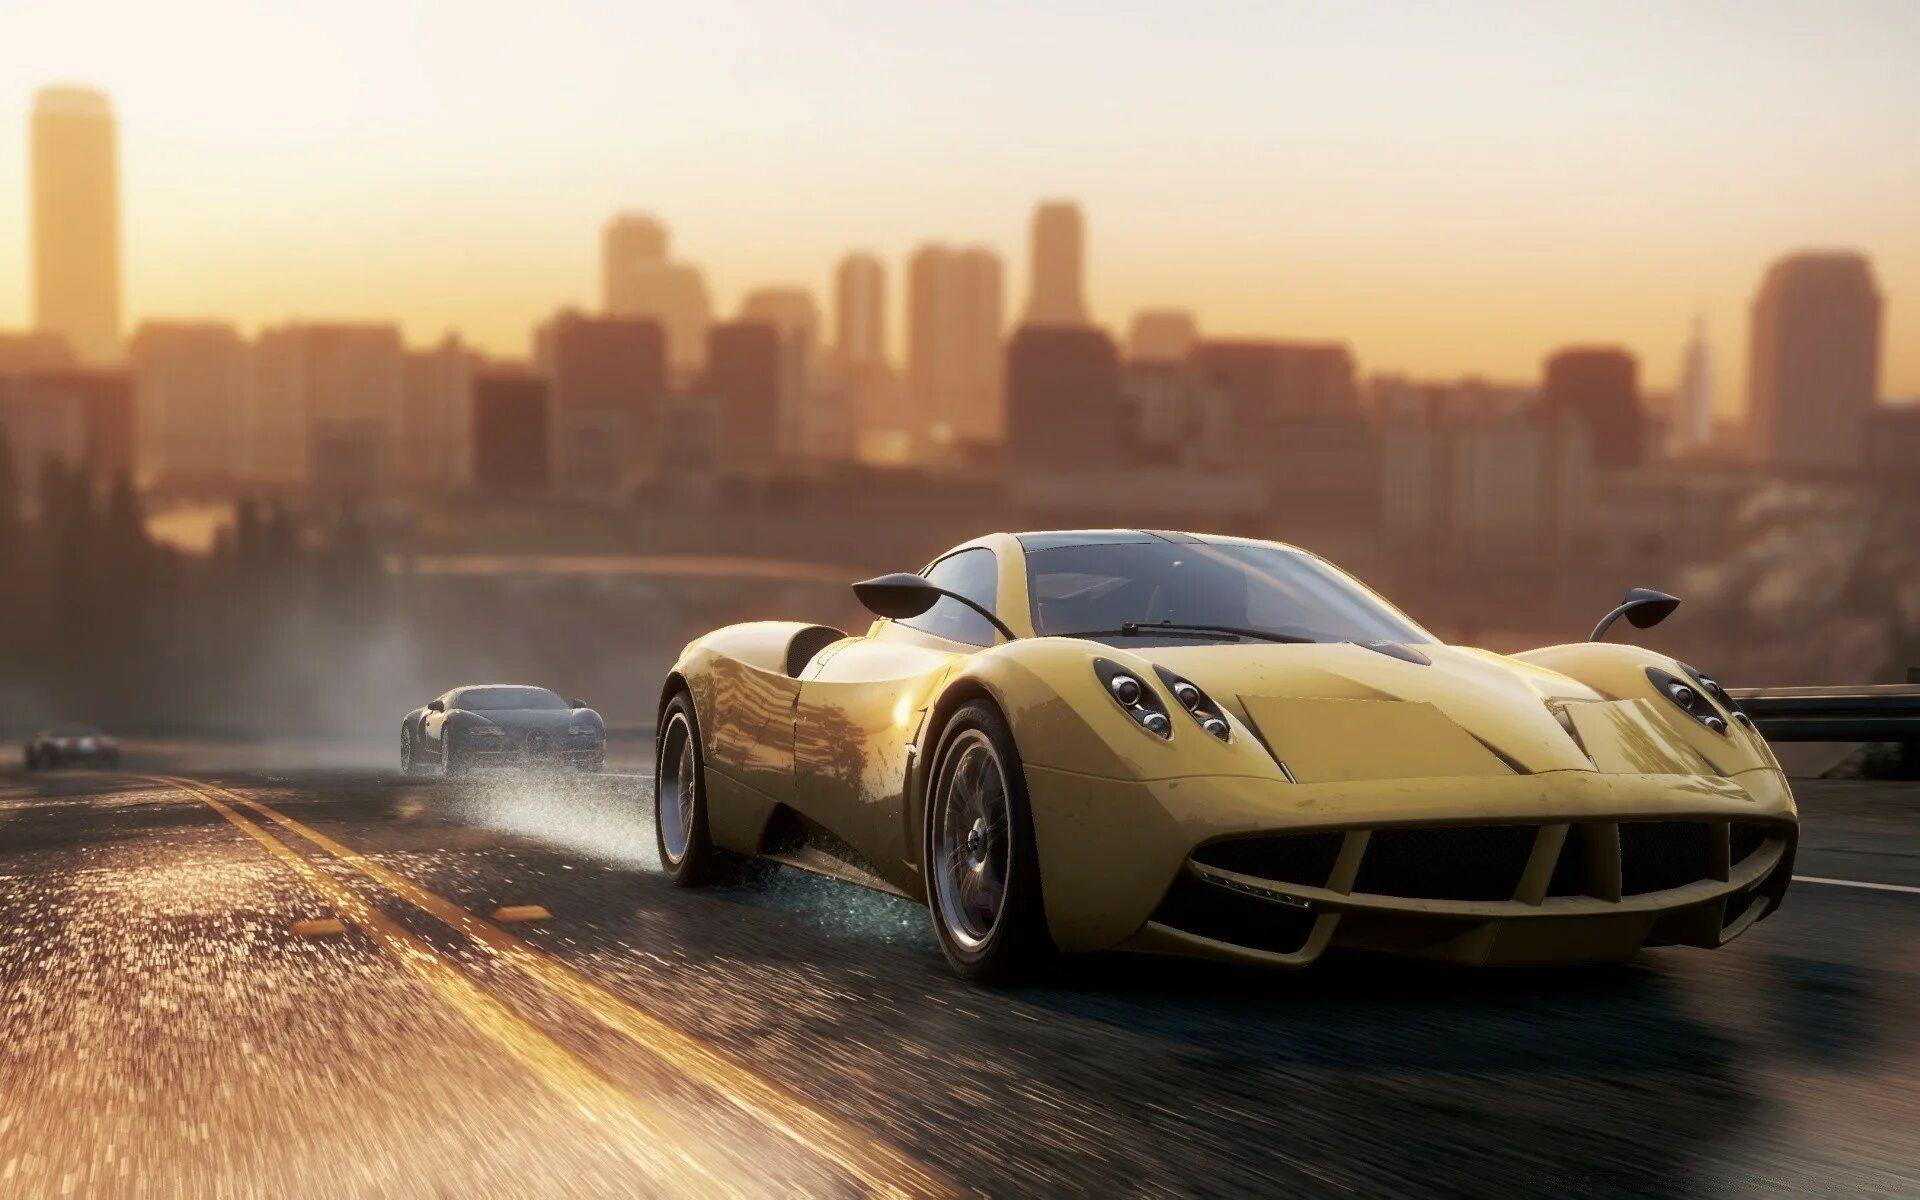 Need download. Need for Speed most wanted 2012. Need for Speed most wanted 2012 Pagani. Pagani Huayra NFS most wanted 2012. Need for Speed MW 2012.